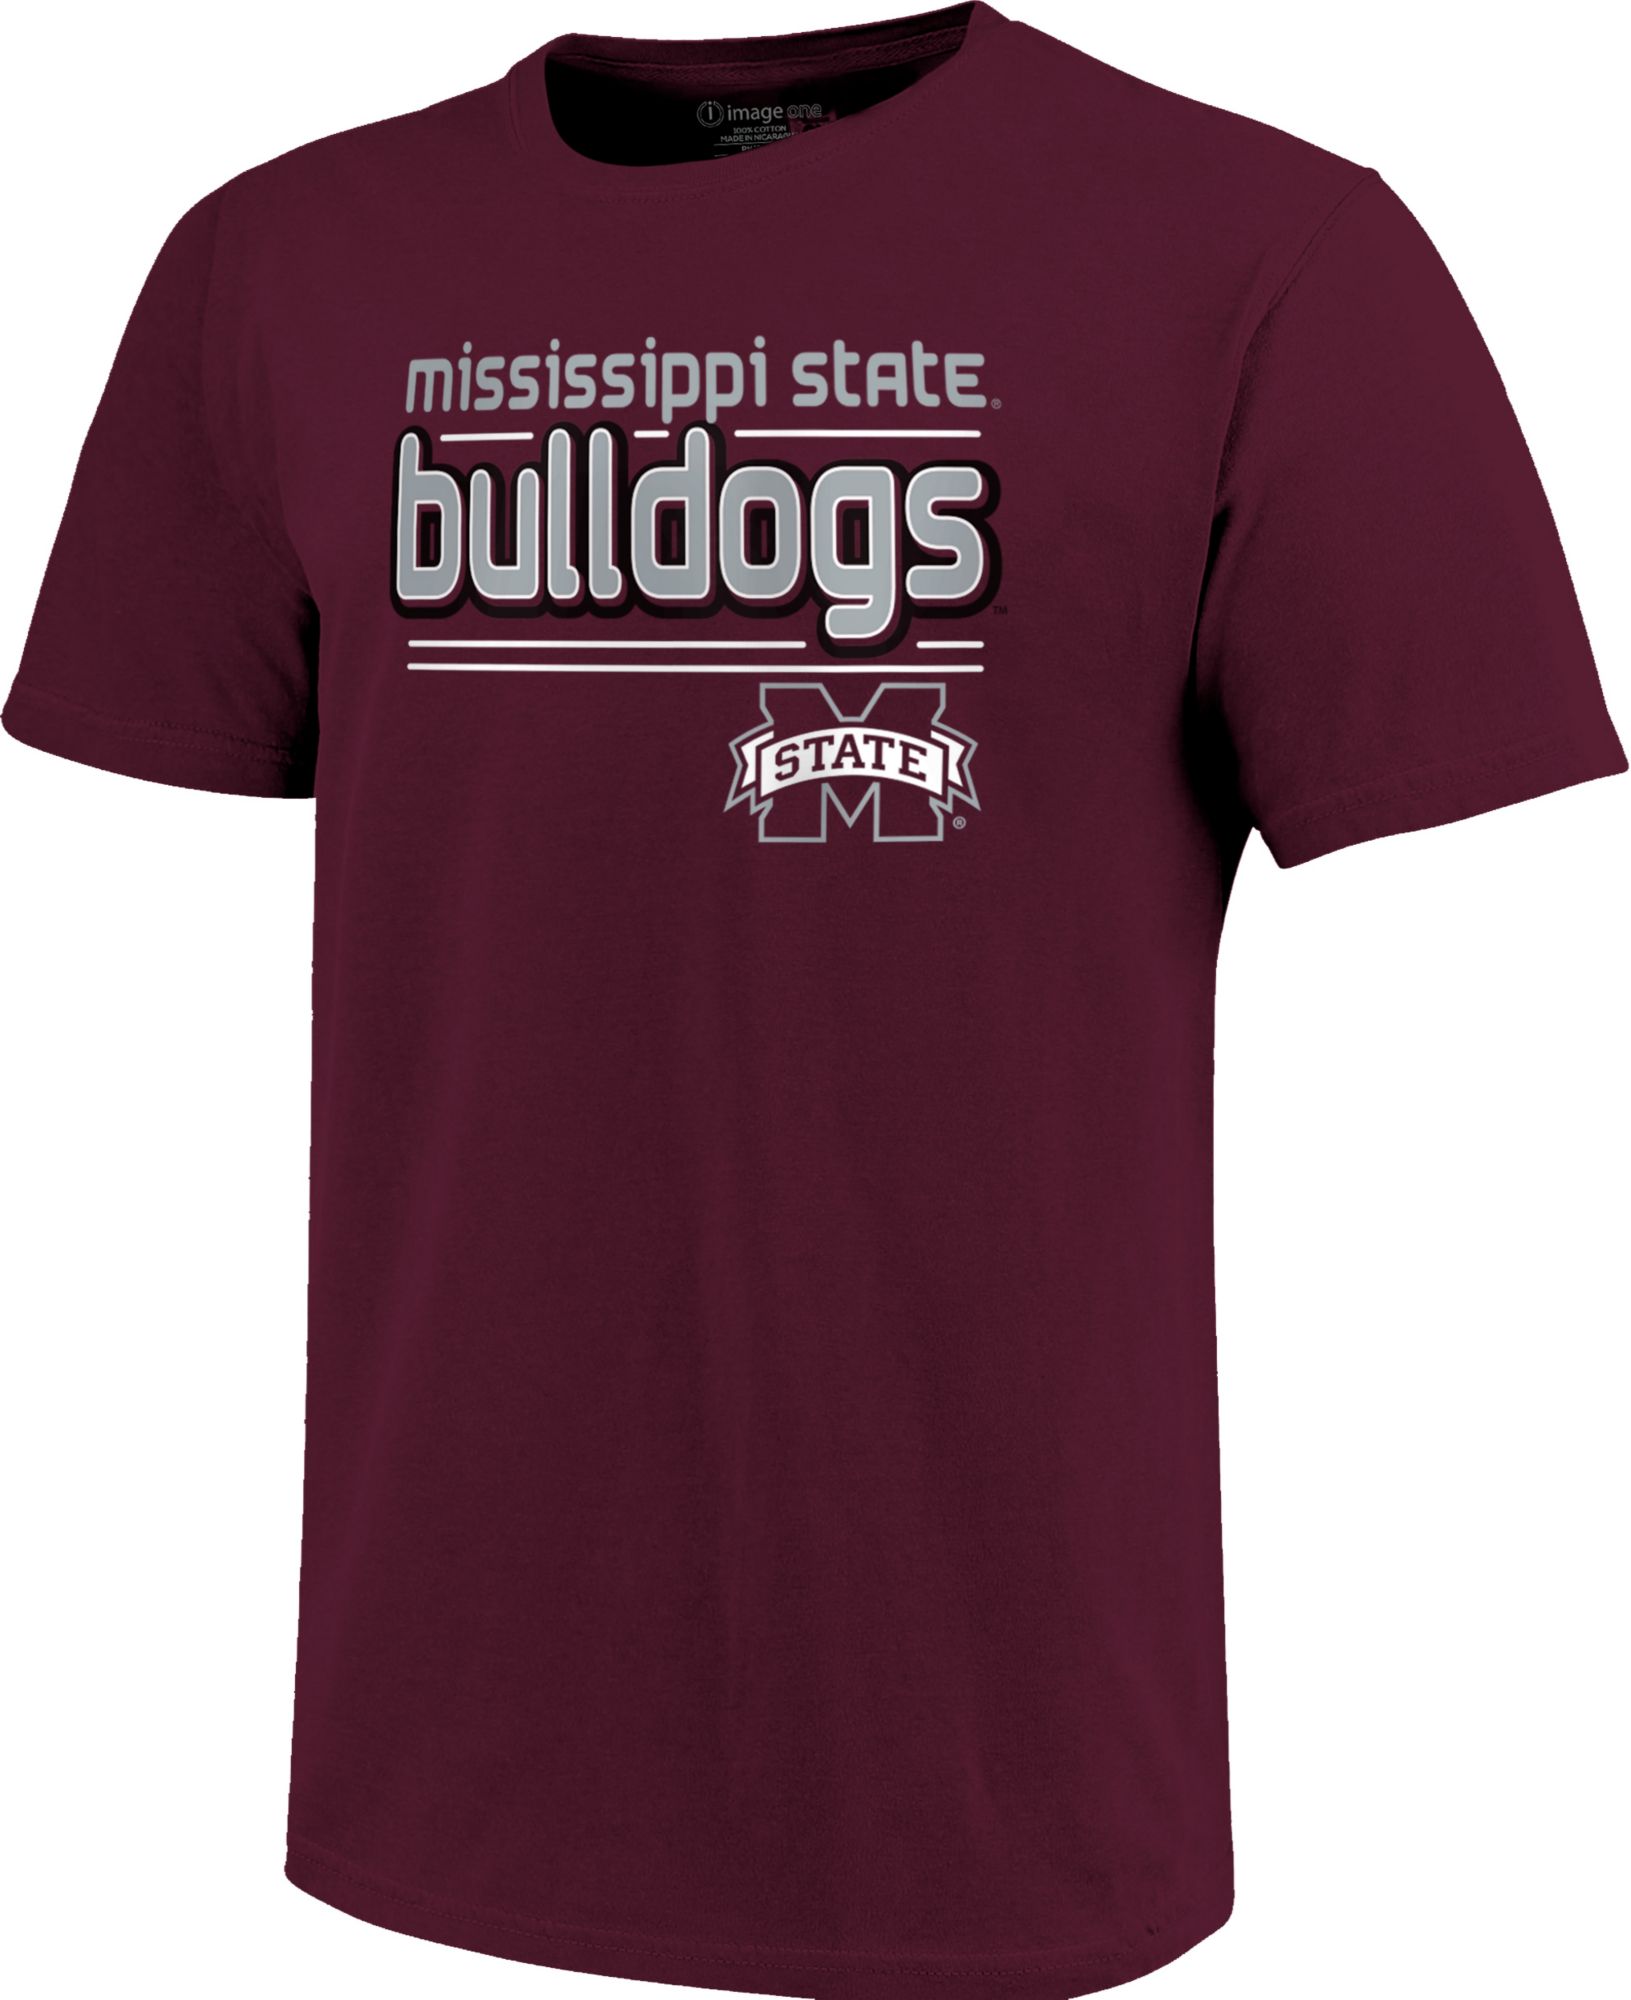 Image One Men's Mississippi State Bulldogs Maroon Bubble Letter T-Shirt